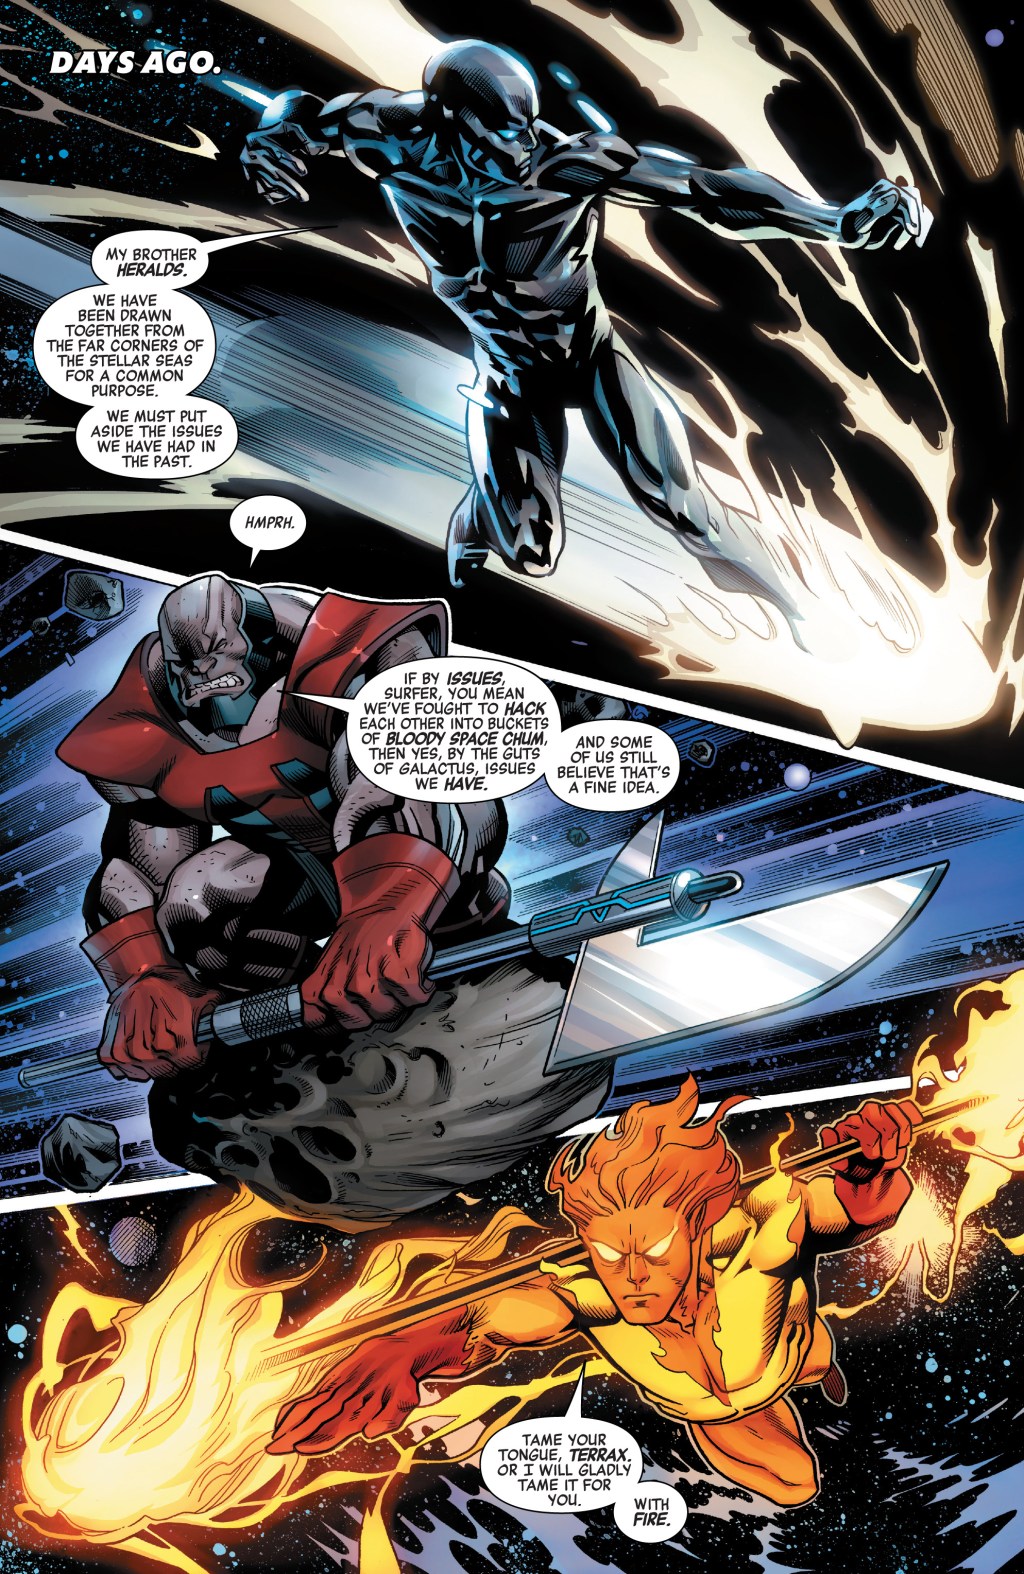 The Silver Surfer reaches out to his fellow Heralds for help in saving the Starbrand in Avengers Vol. 8 #28 "Starbrand Reborn - Part Two: The Three Heralds" (2019), Marvel Comics. Words by Jason Aaron, art by Ed McGuinness, Mark Morales, Jason Keith, Erick Aciniega, and Cory Petit.